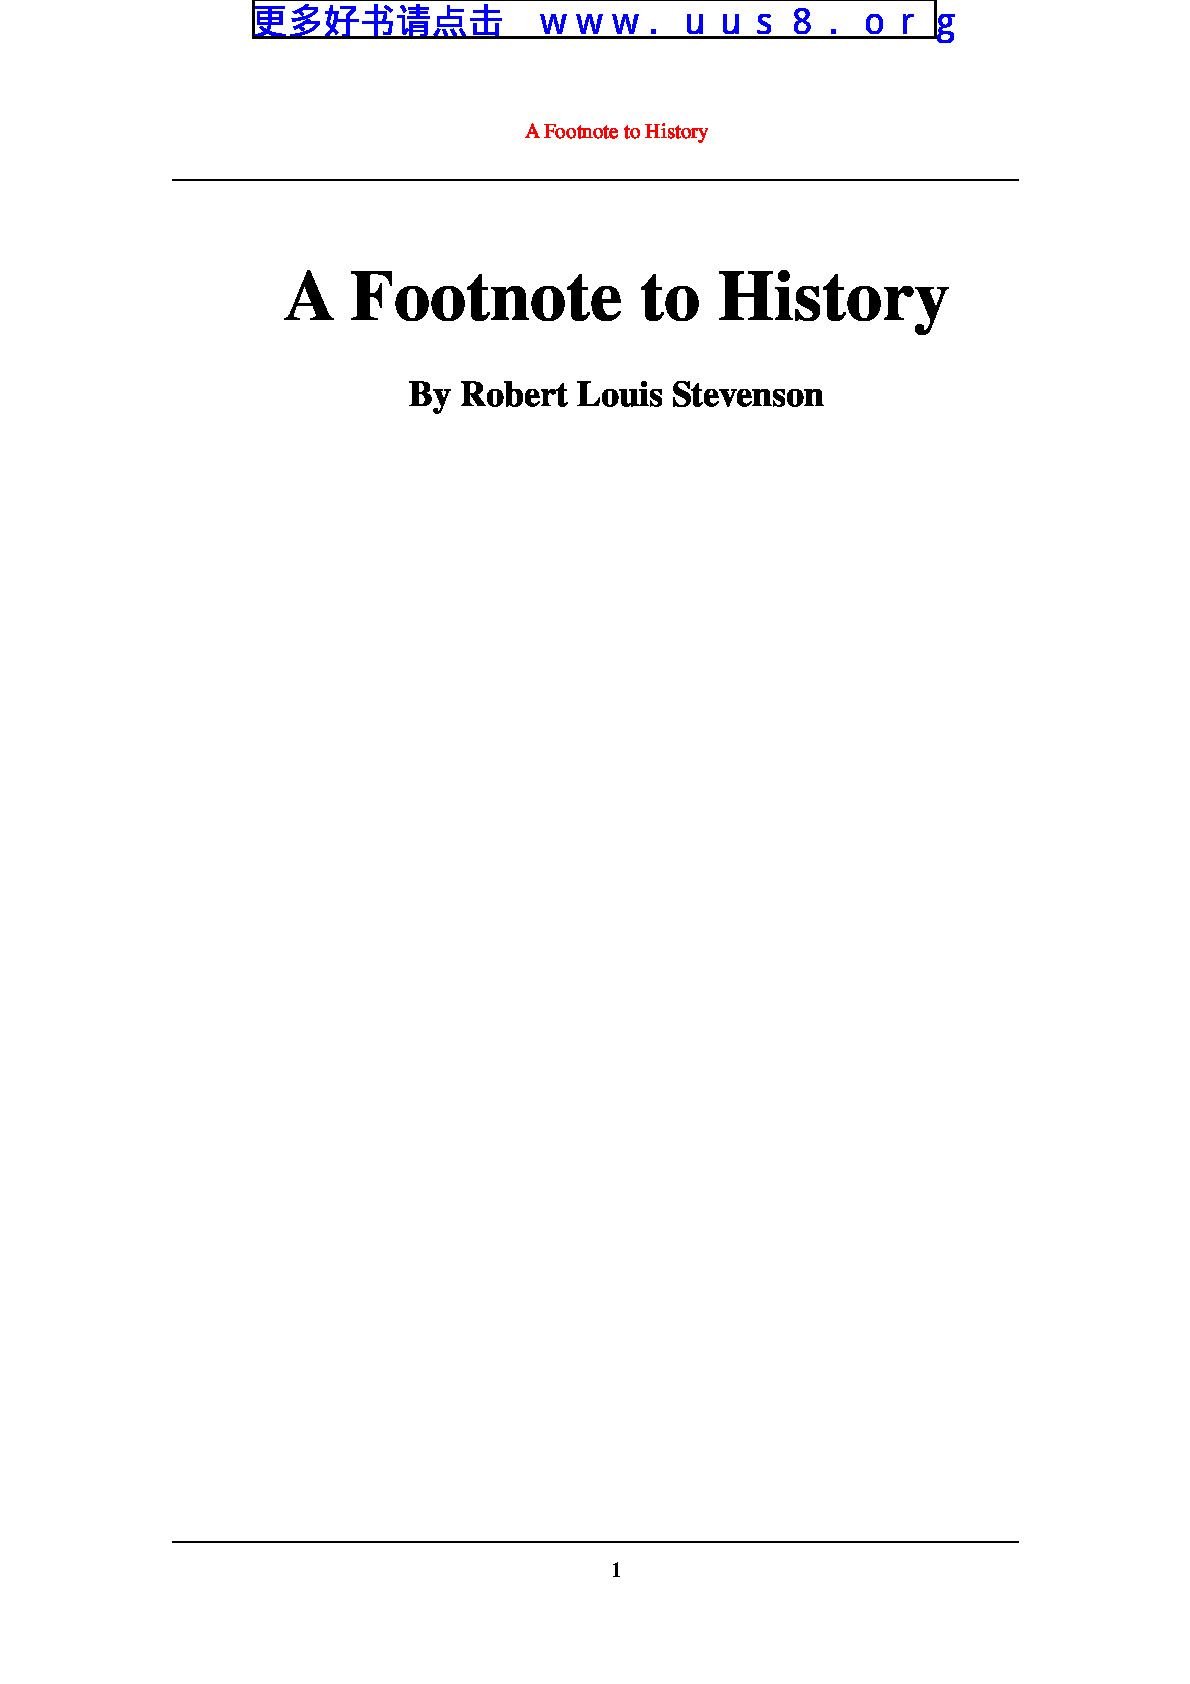 a_footnote_to_history(历史脚注)